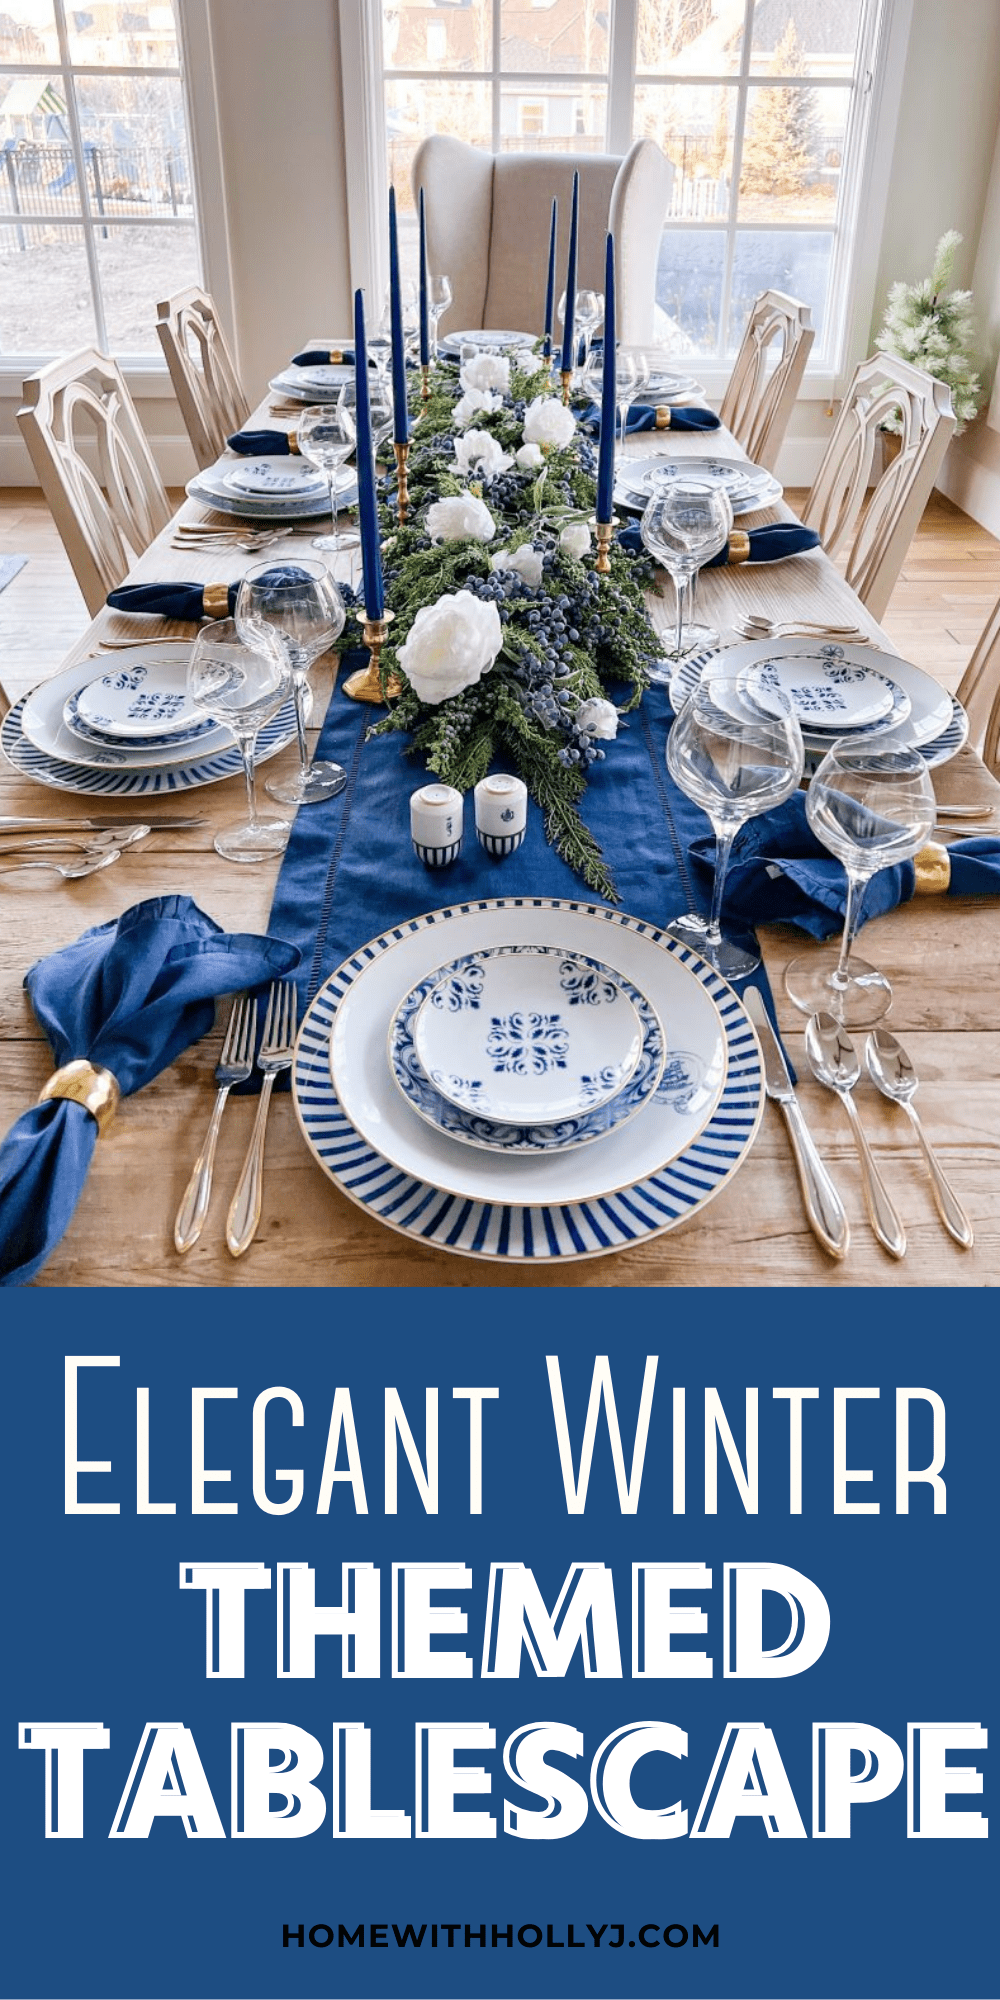 Sharing a beautiful winter themed table setting featuring blue and white colors, plates, napkins, and candlesticks